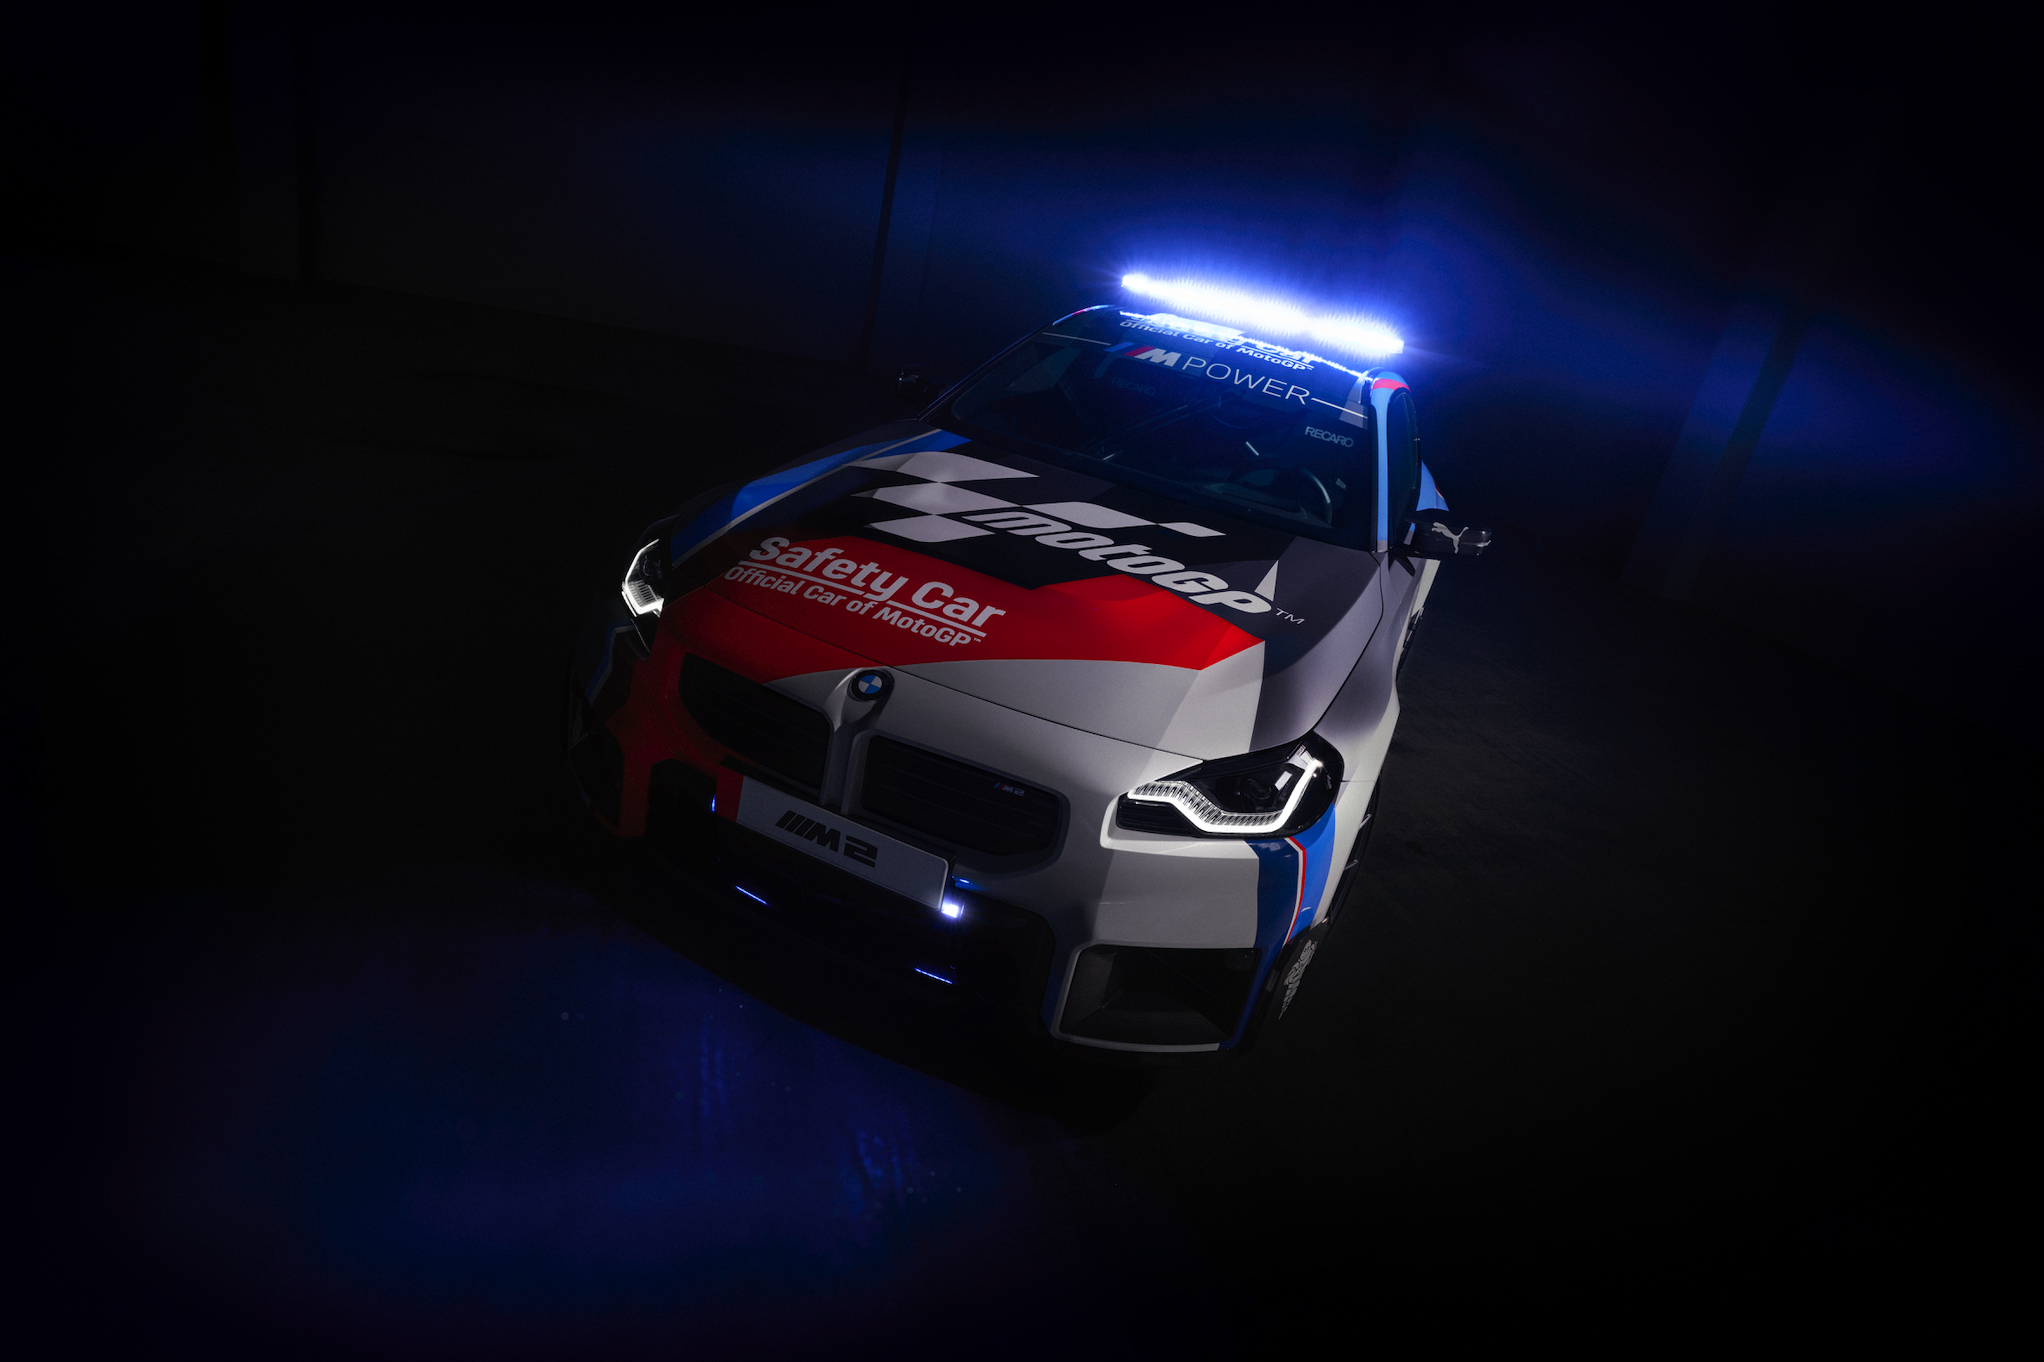 new bmw m2 is the official motogp safety car